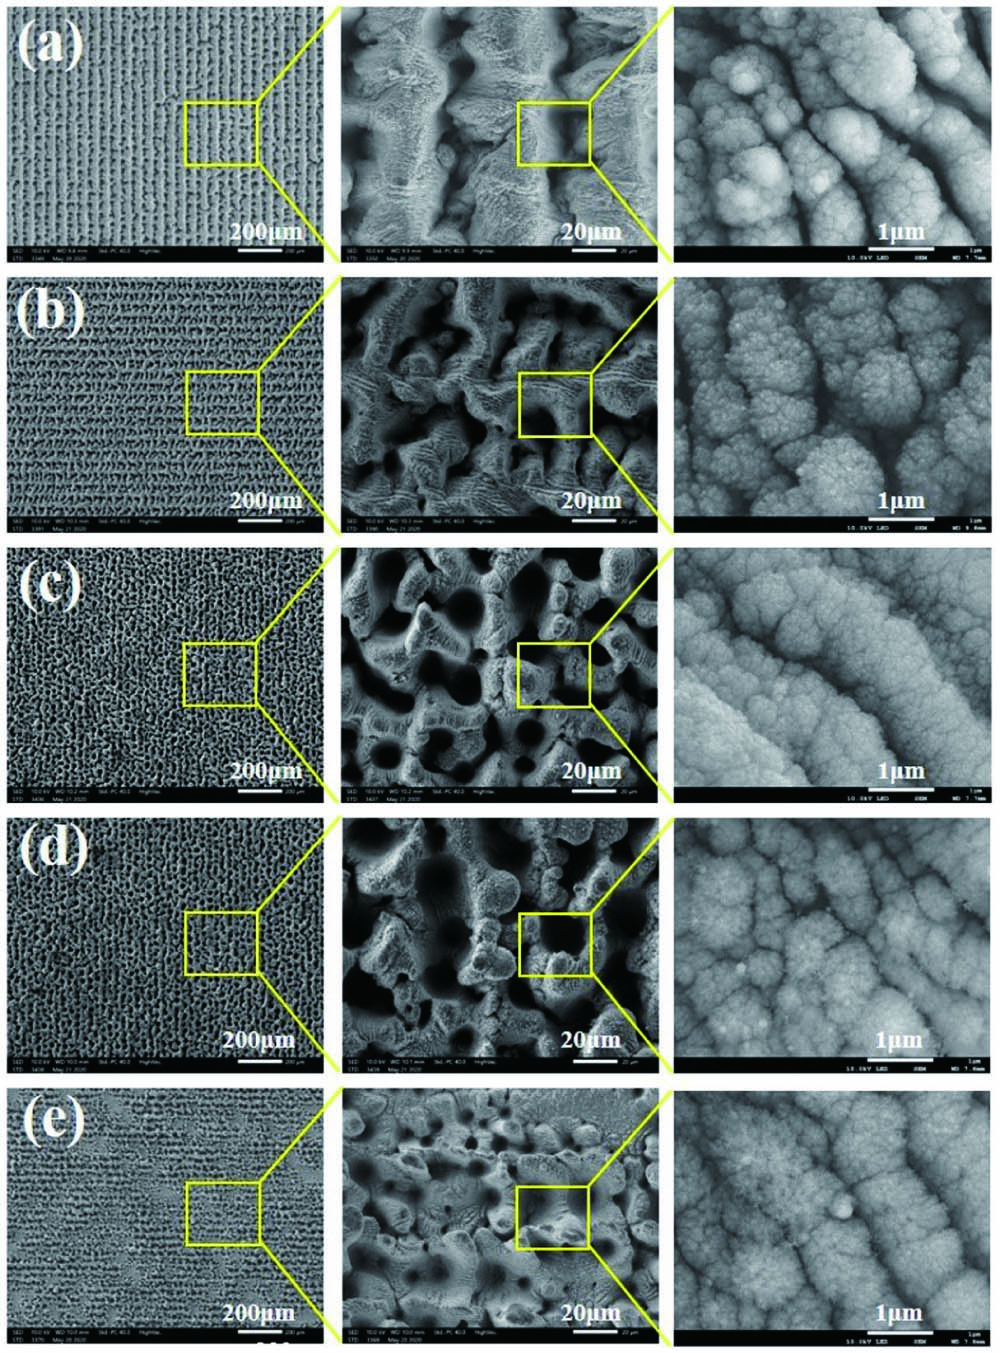 Morphology of micro/nano structures induced by the fs laser at different defocusing distances: (a) 1.60 mm; (b) 1.62 mm; (c) 1.64 mm; (d) 1.66 mm; (e) 1.68 mm.